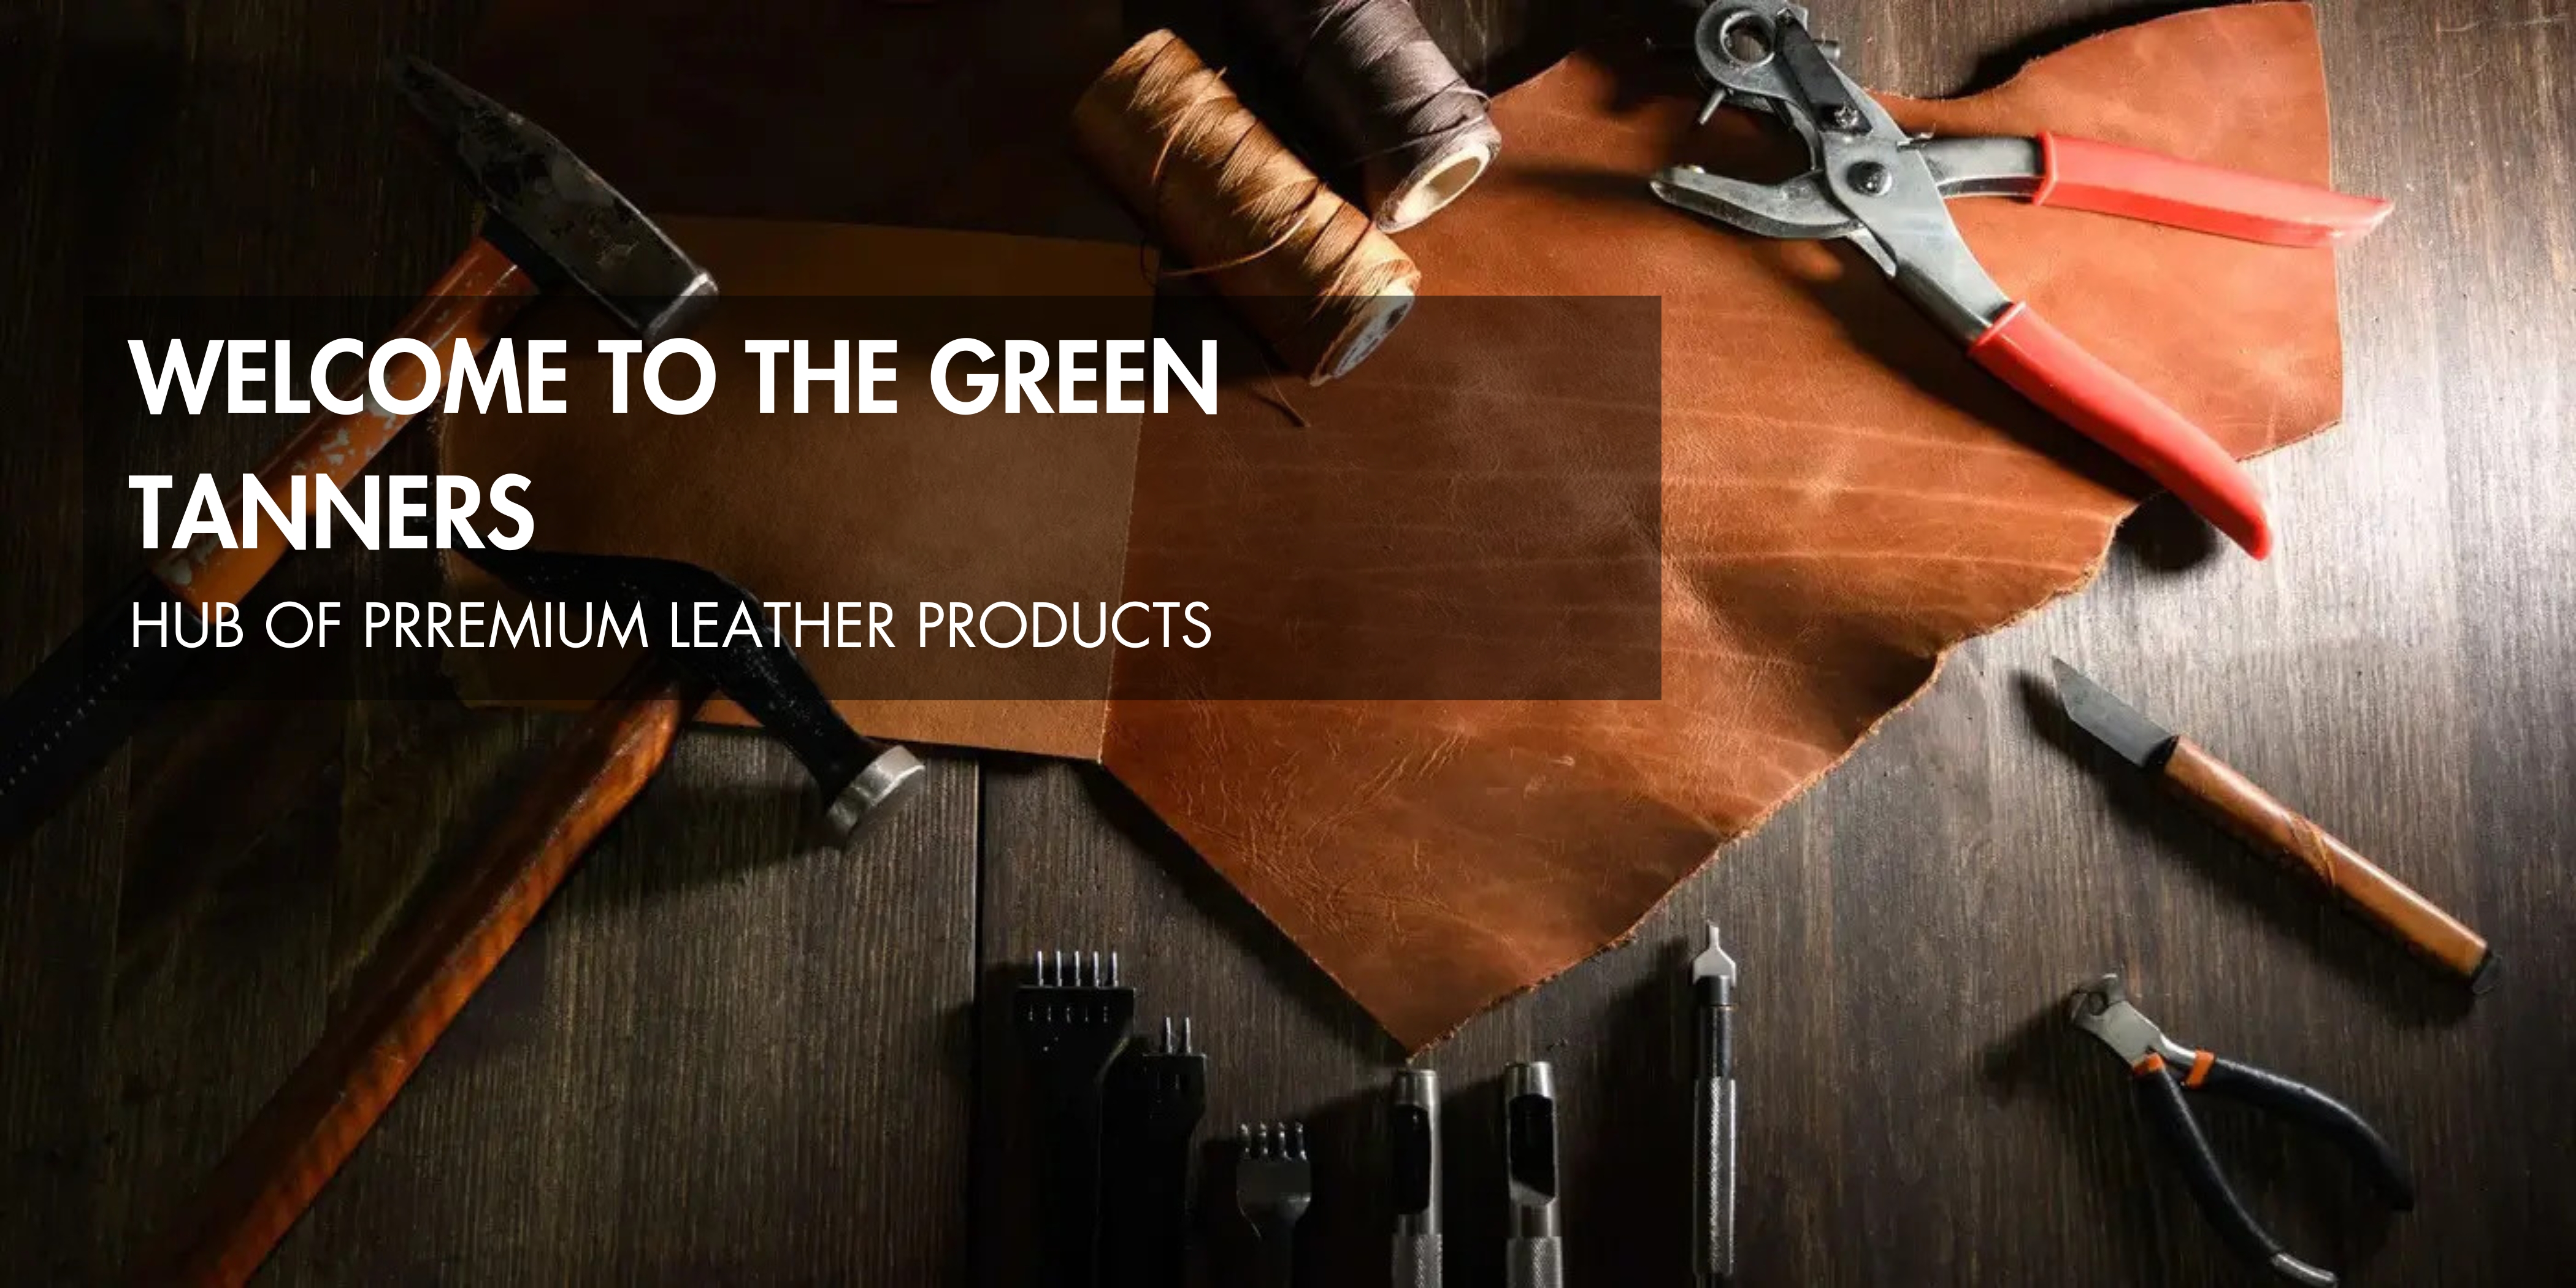  The Green Tanners, Leather Goods, Leather Products